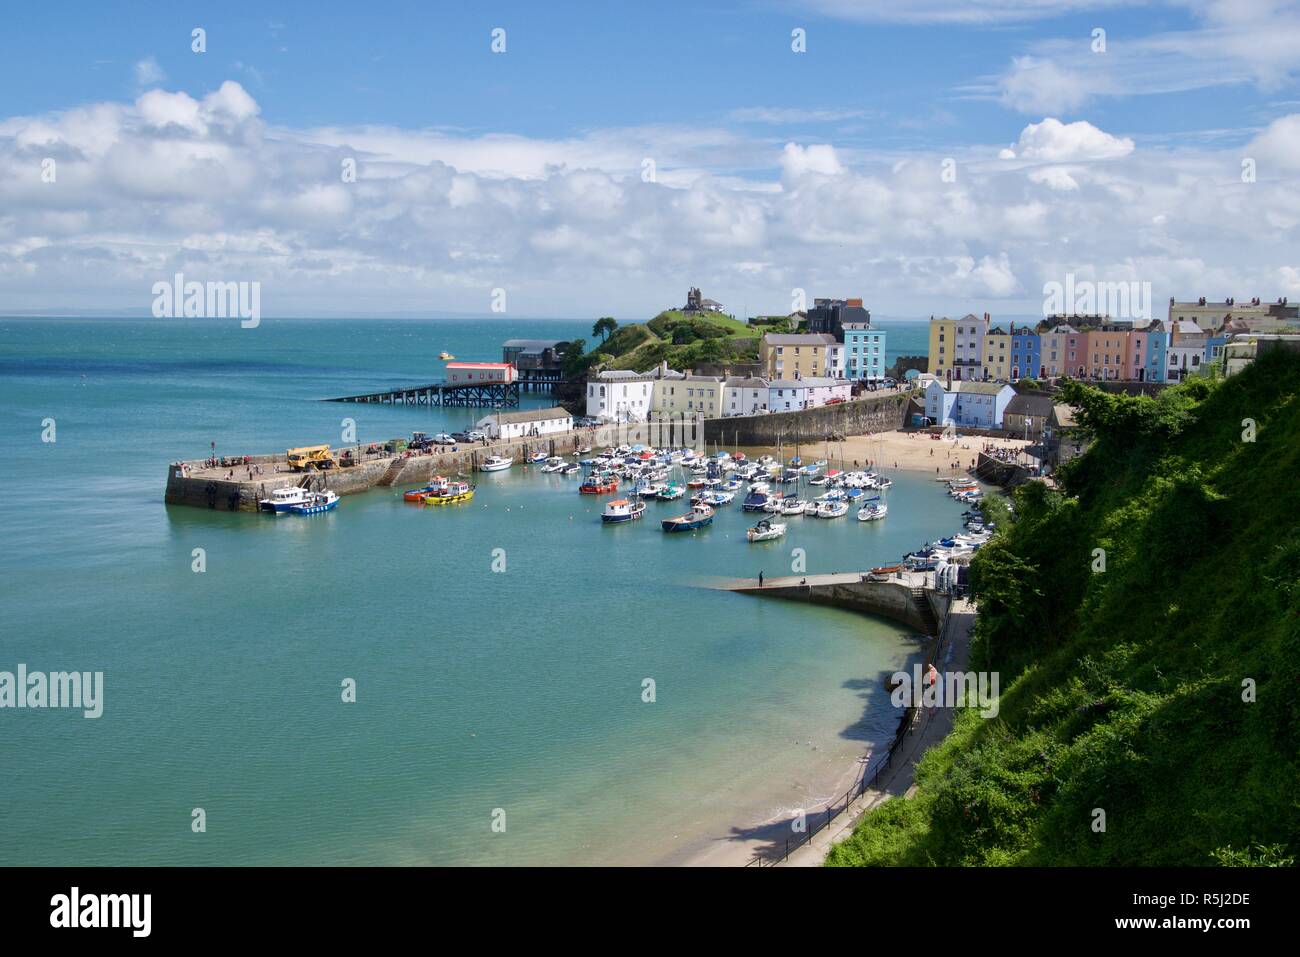 View over Tenby harbour, town and castle, Pembrokeshire, Wales, United Kingdom Stock Photo